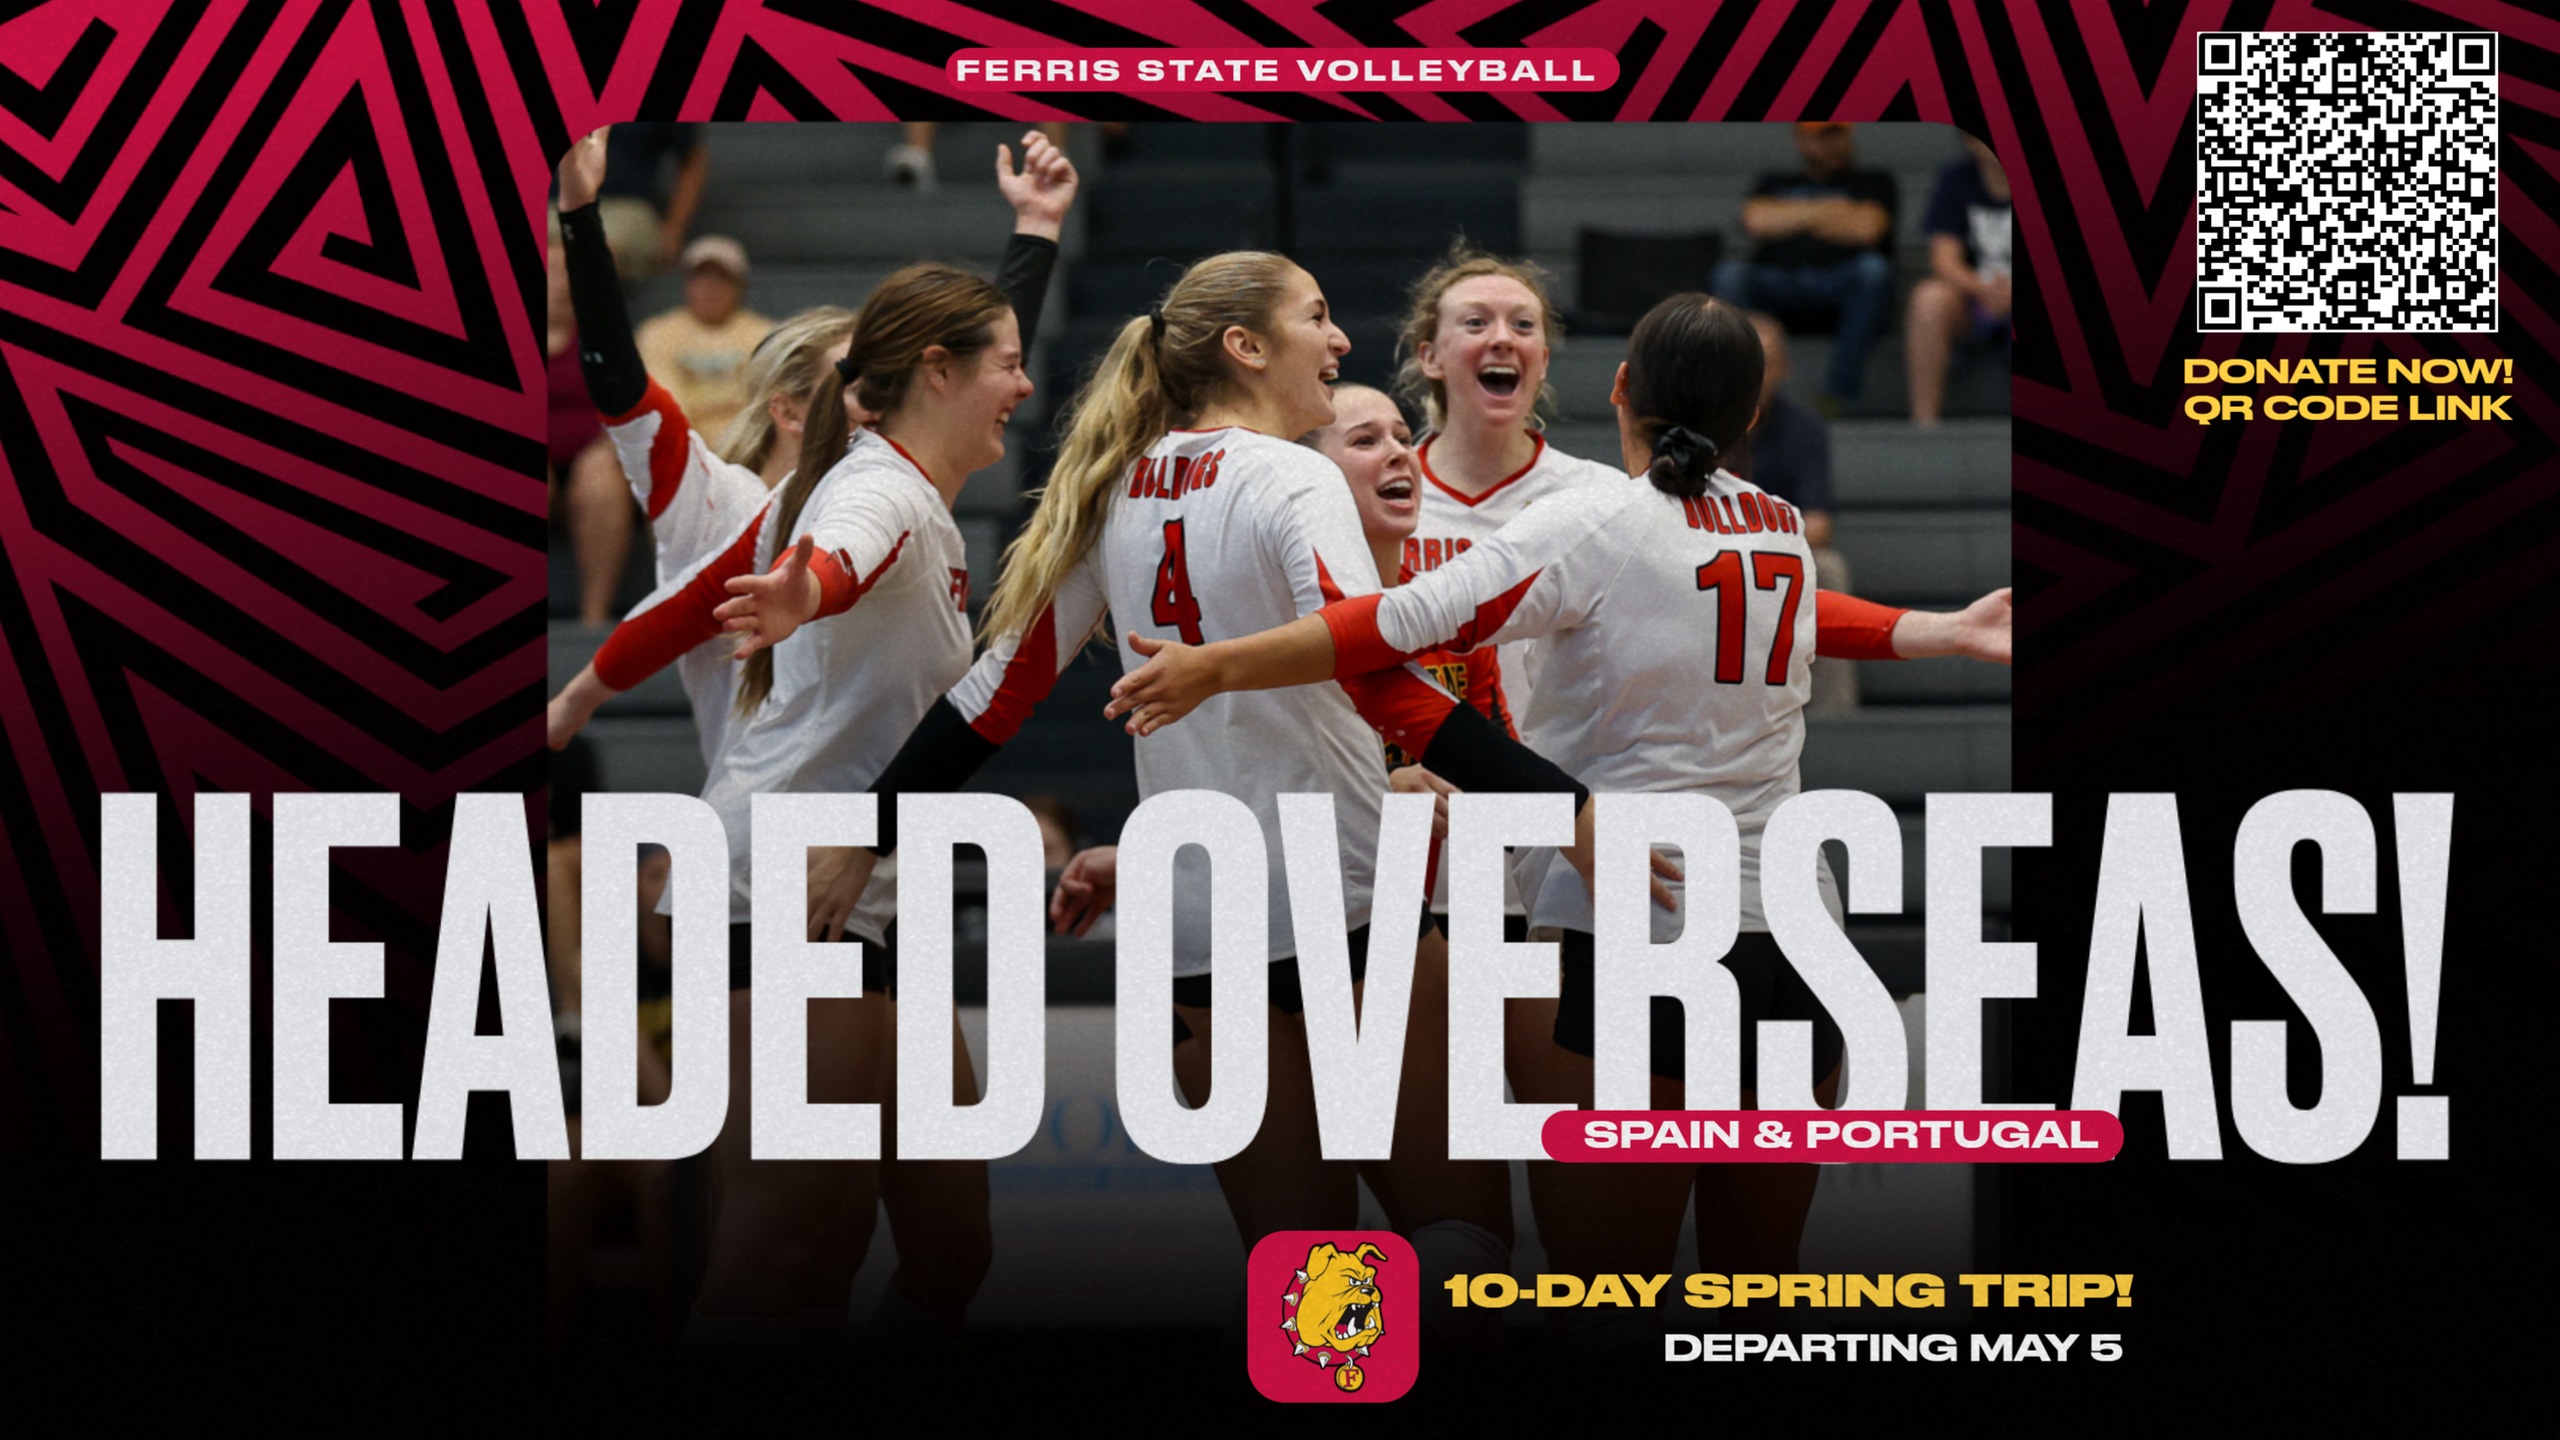 Ferris State Volleyball Headed To Spain & Portugal This May!